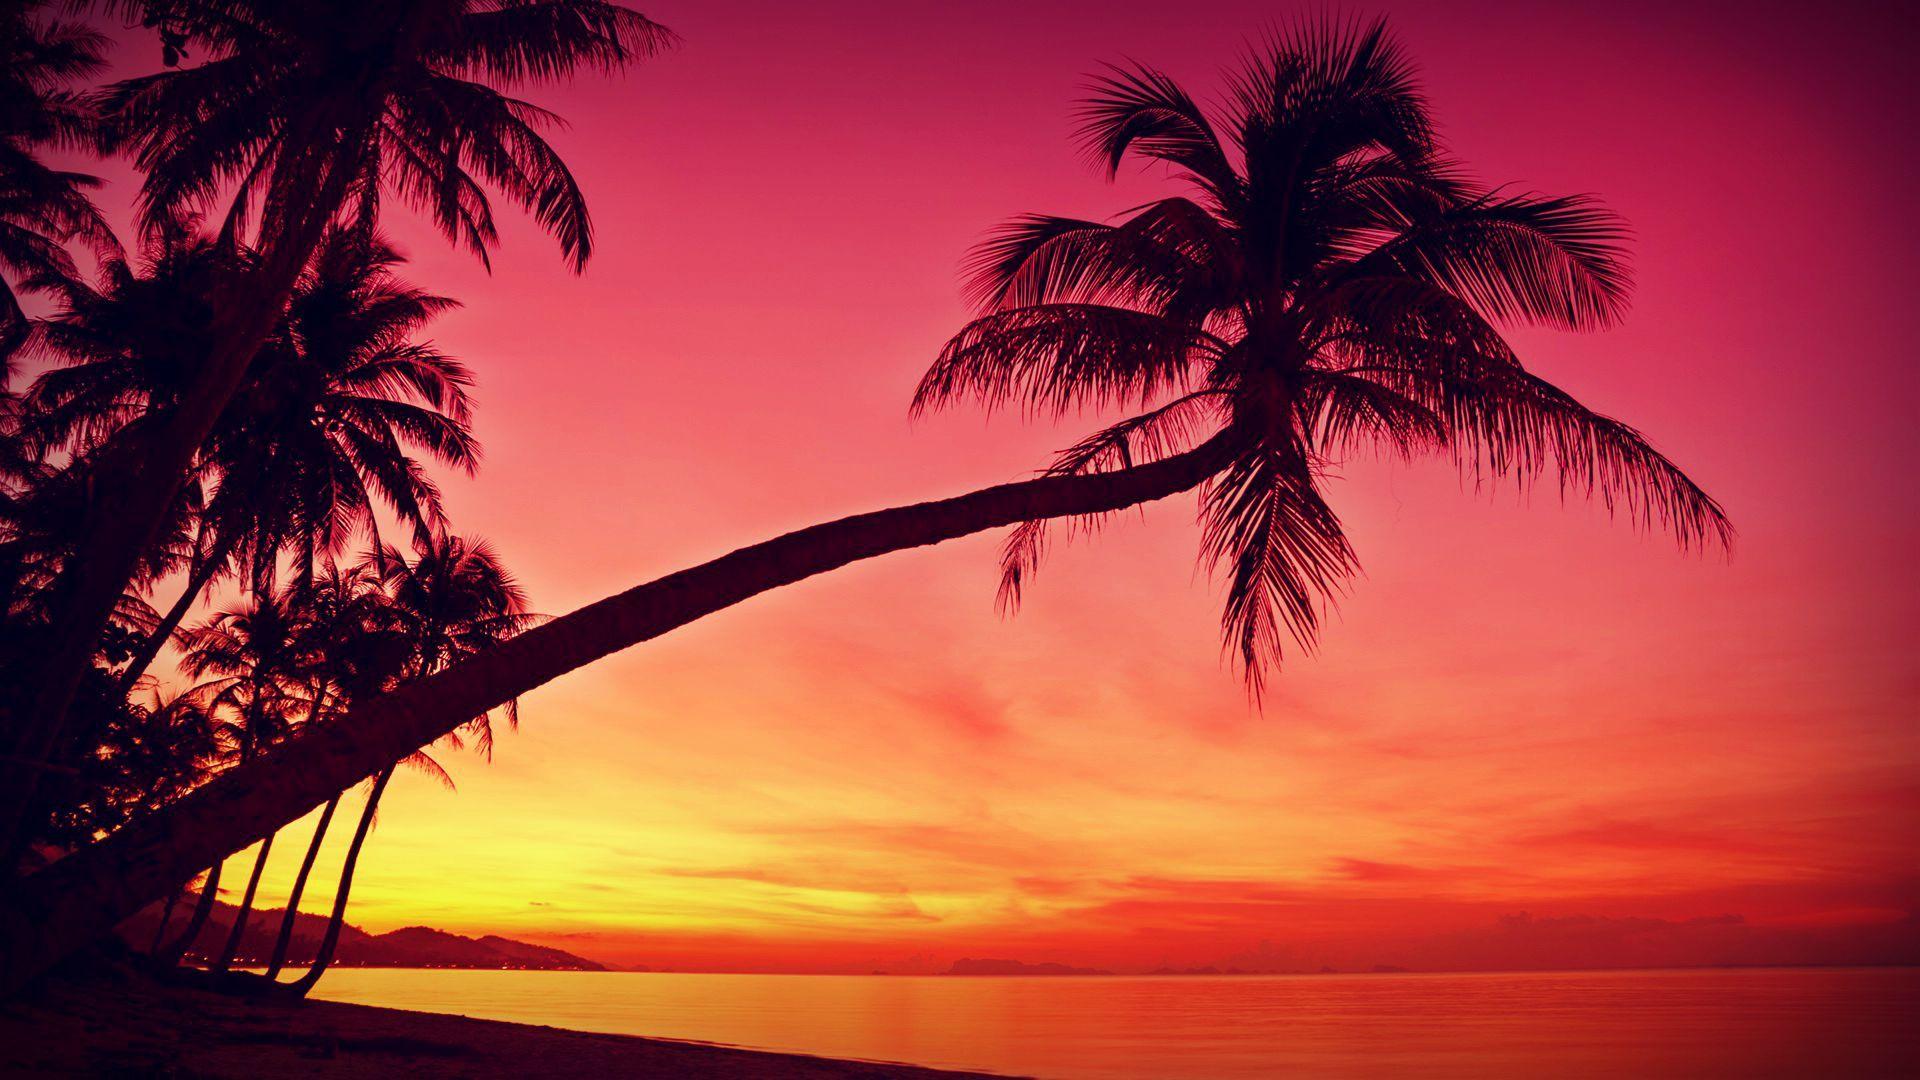 Palm Tree Sunset Wallpapers Top Free Palm Tree Sunset Backgrounds Wallpaperaccess